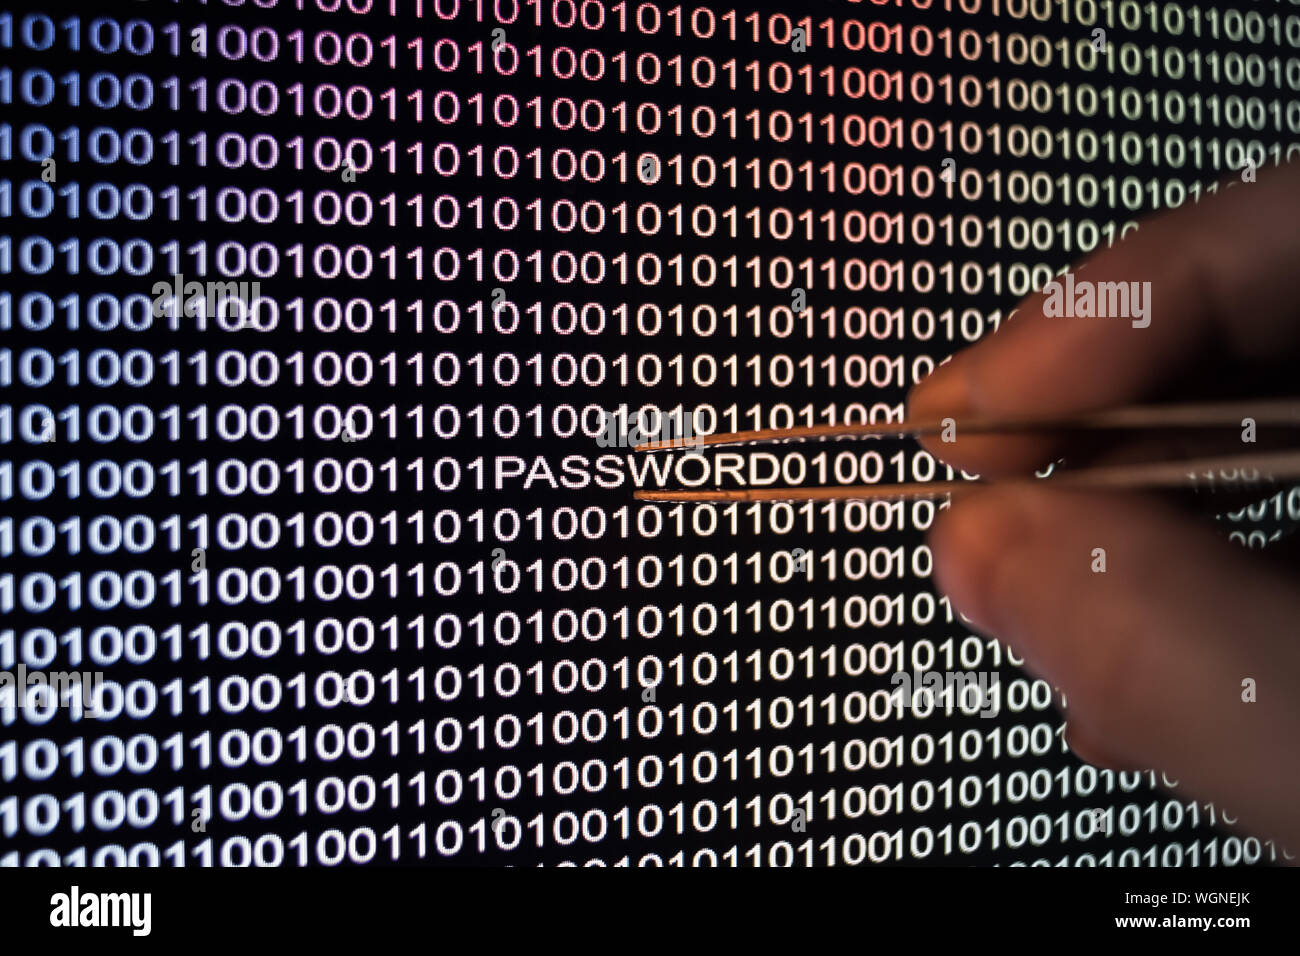 Cropped Image Of Computer Hacker With Binary Codes Stock Photo